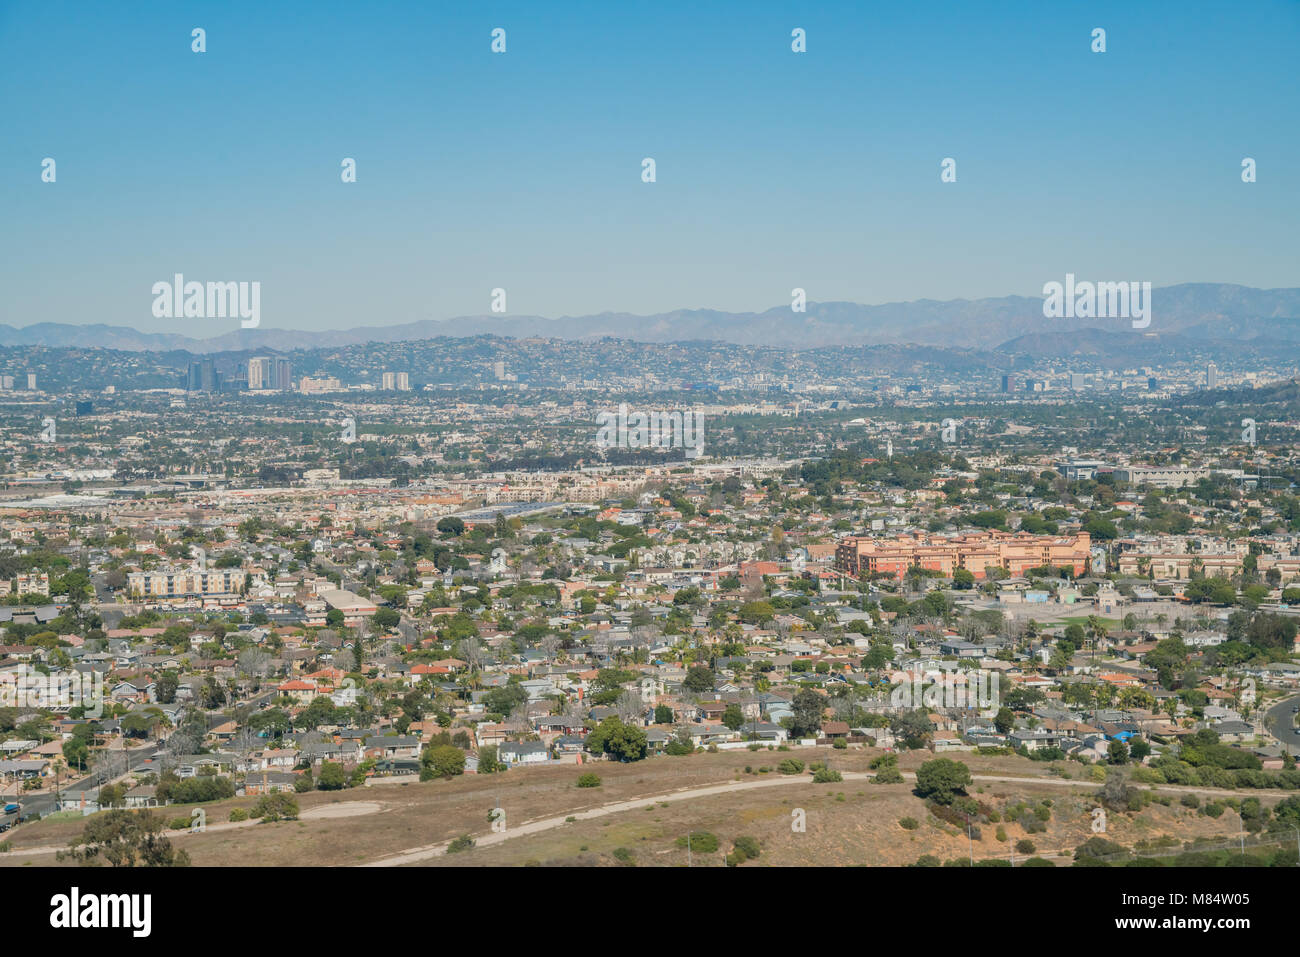 Aerial view of Playa Del Rey area from airplane, Los Angeles, California Stock Photo